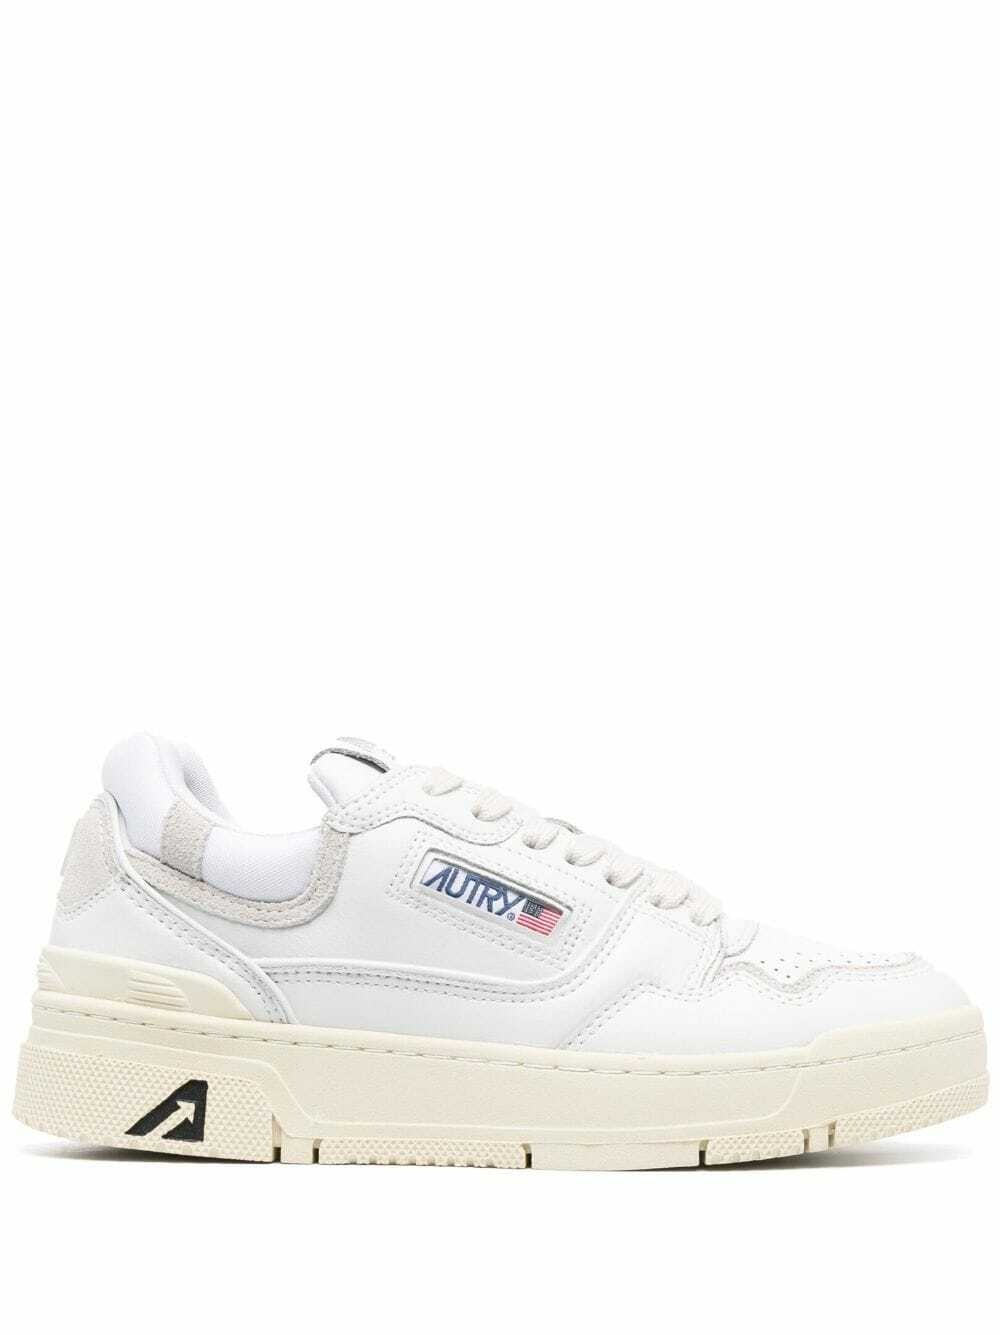 AUTRY - Clc Leather Sneakers Autry